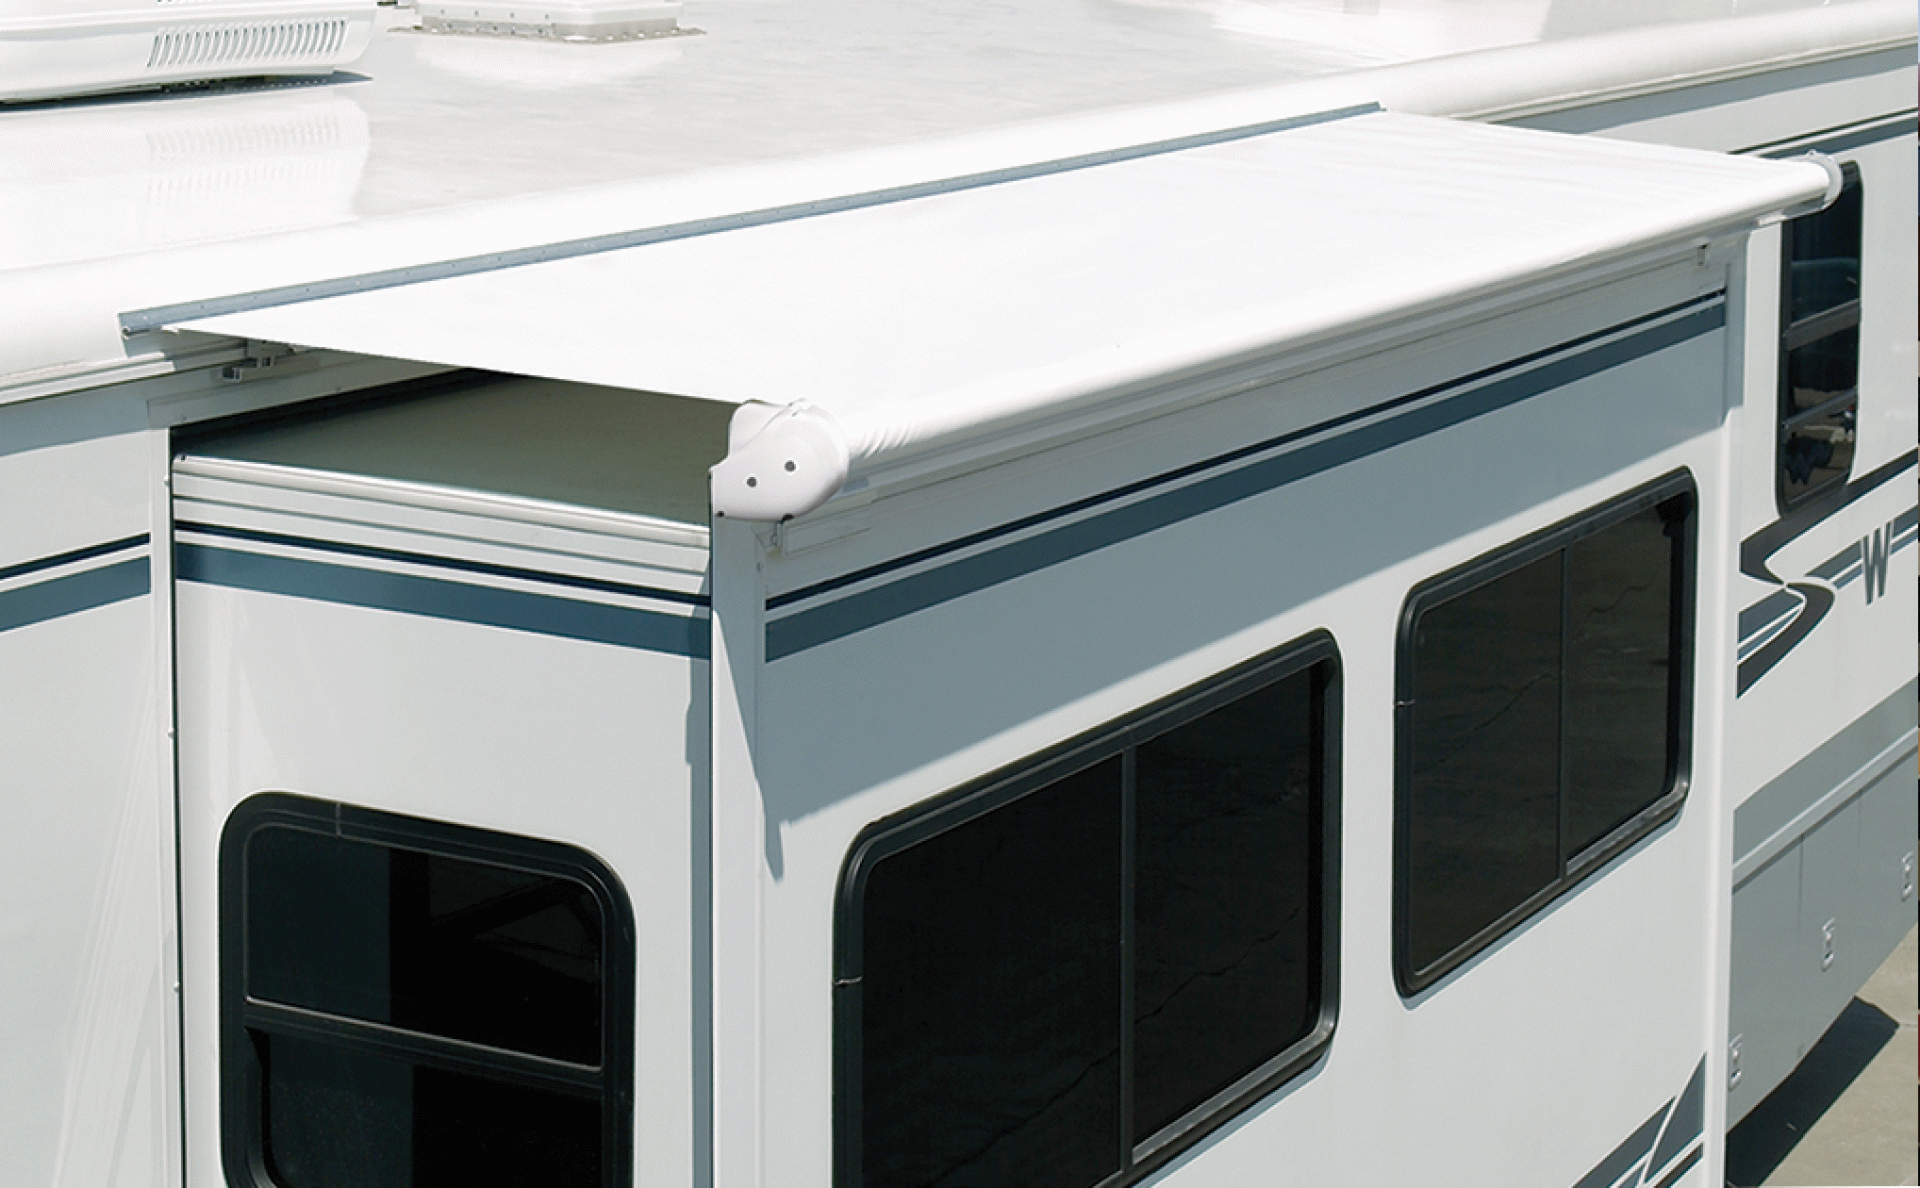 CAREFREE OF COLORADO | UQ1050025 | SIDEOUT KOVER III AWNING 102" - 105" ROOF RANGE WHITE VINYL FABRIC & DEFLECTOR